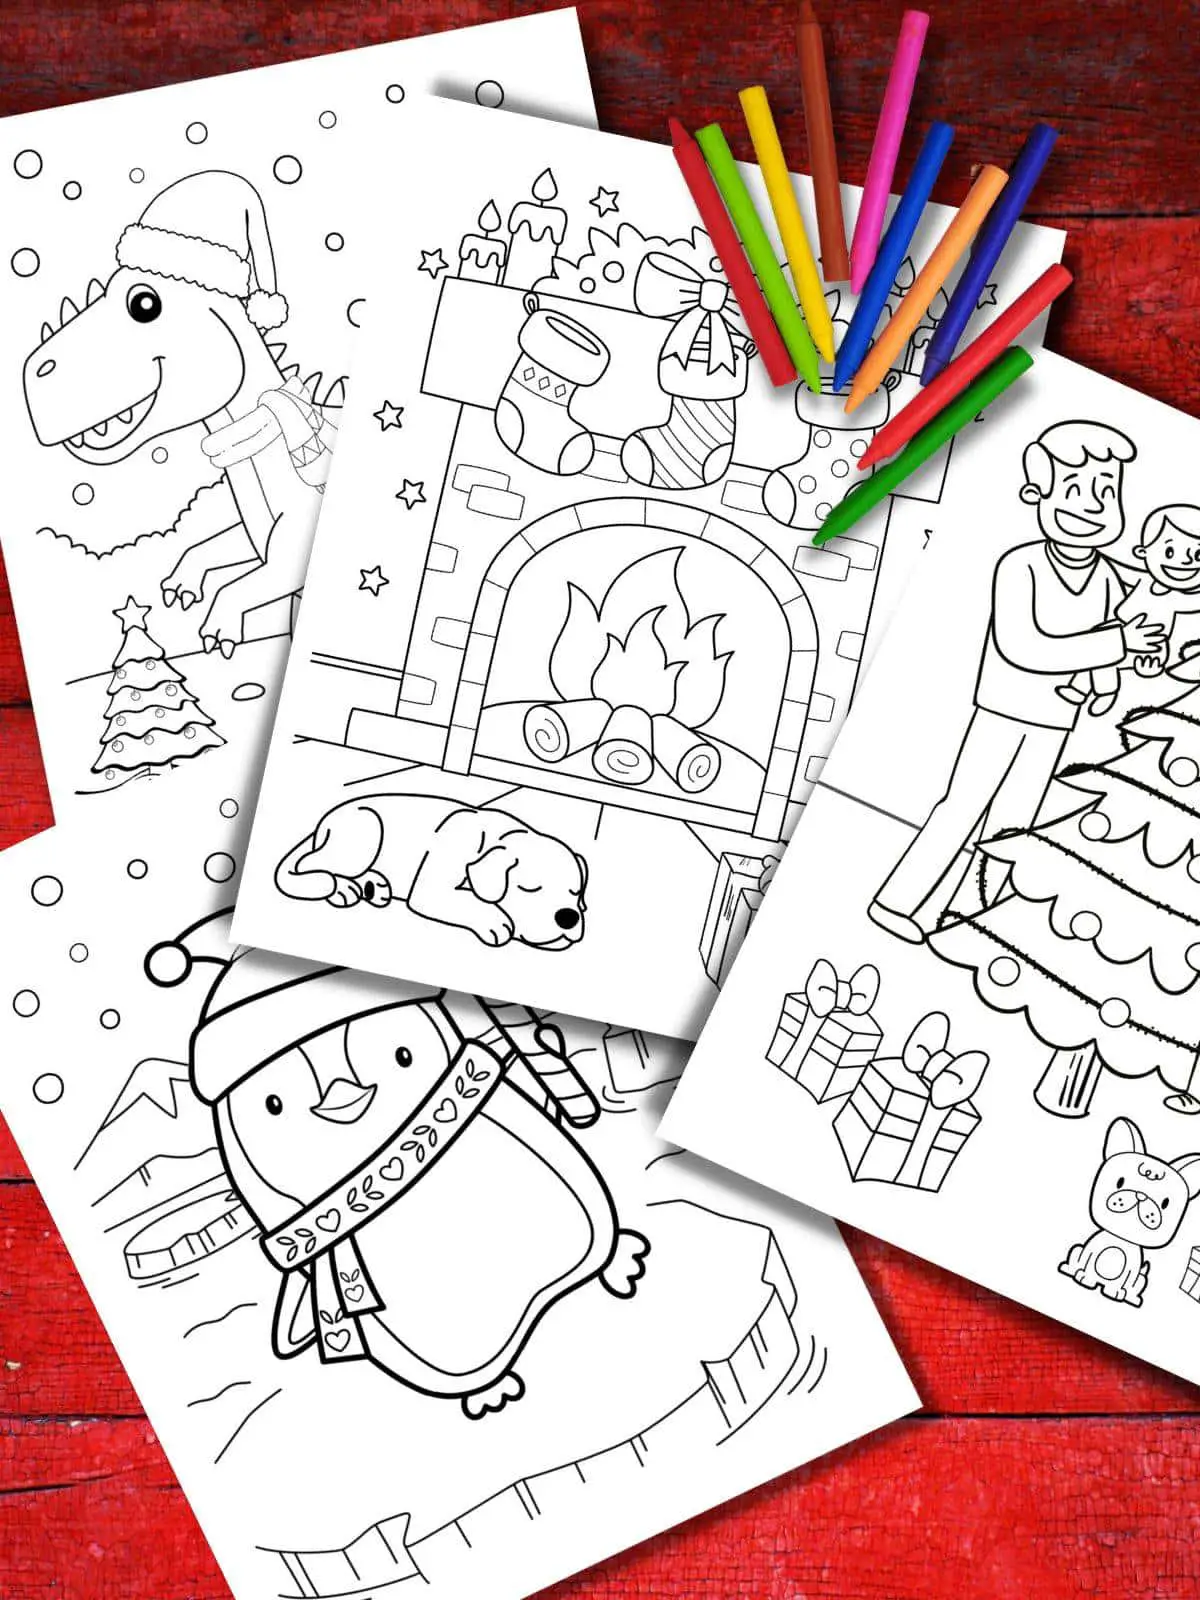 Four Printable Christmas Coloring Pages on a red background with some crayons